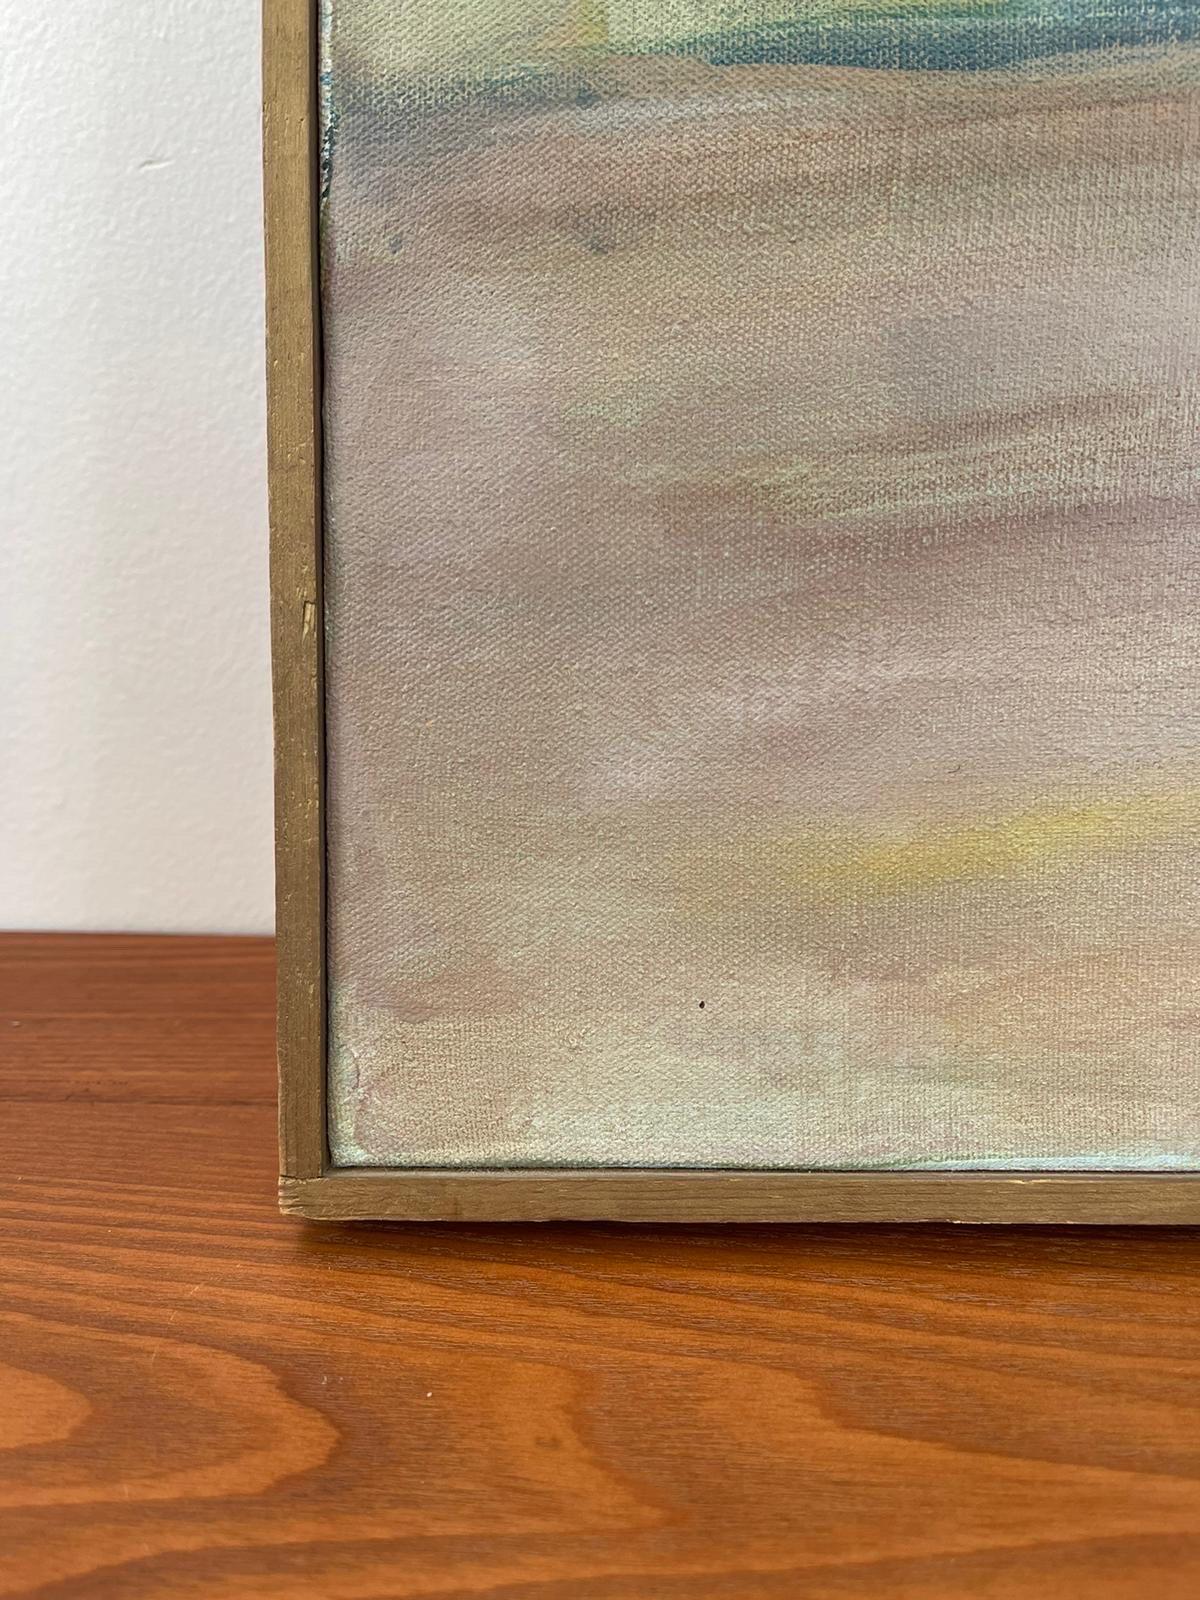 Canvas Vintage Original Oil Painting Within Wooden Frame by Elizabeth Leopold. For Sale